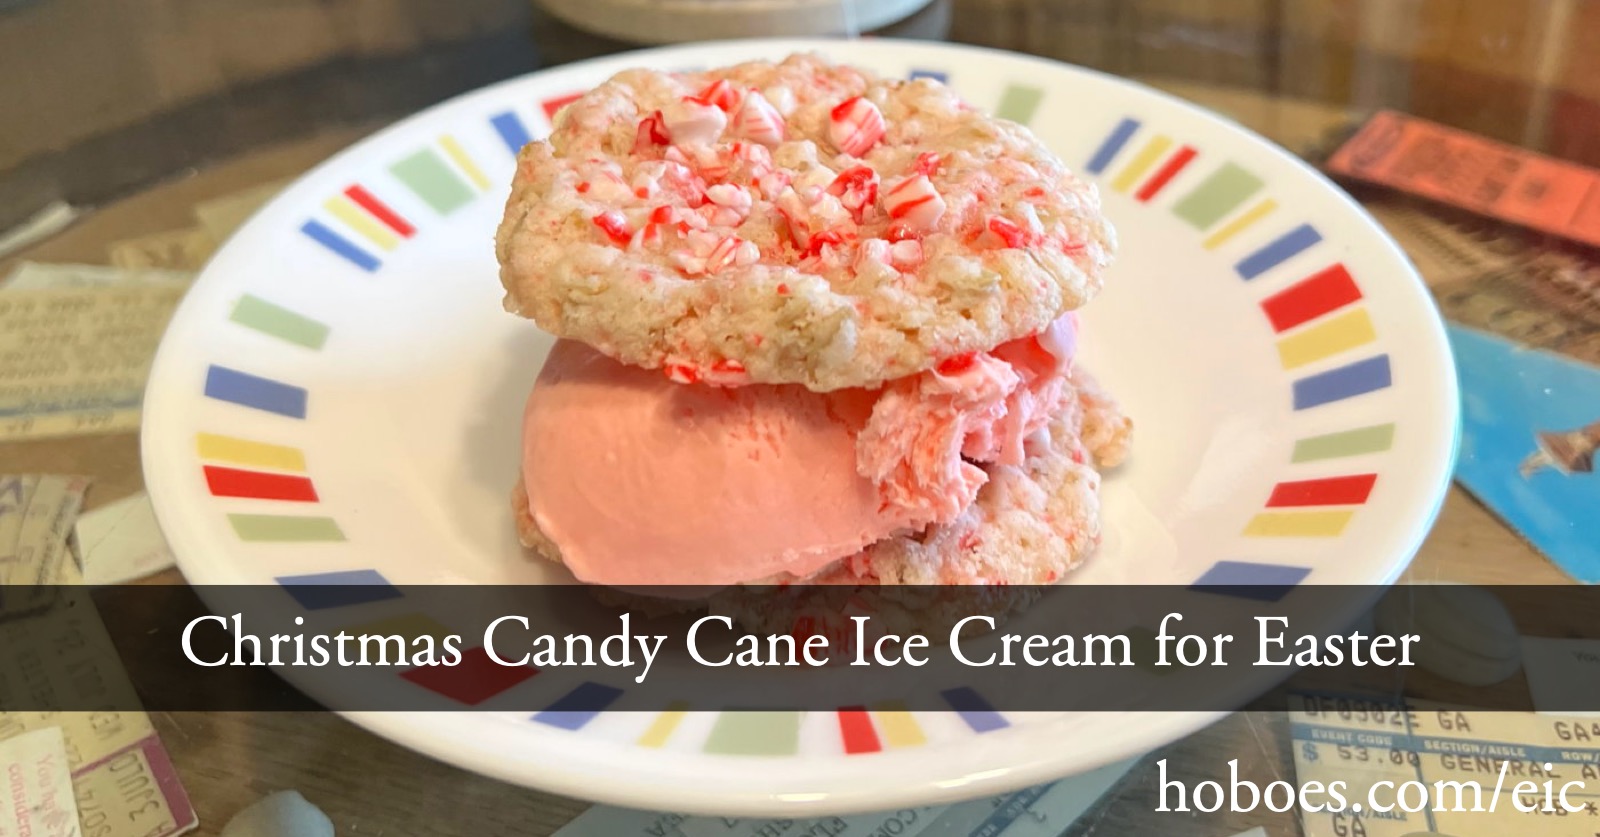 Christmas Candy Cane Ice Cream for Easter (social media)